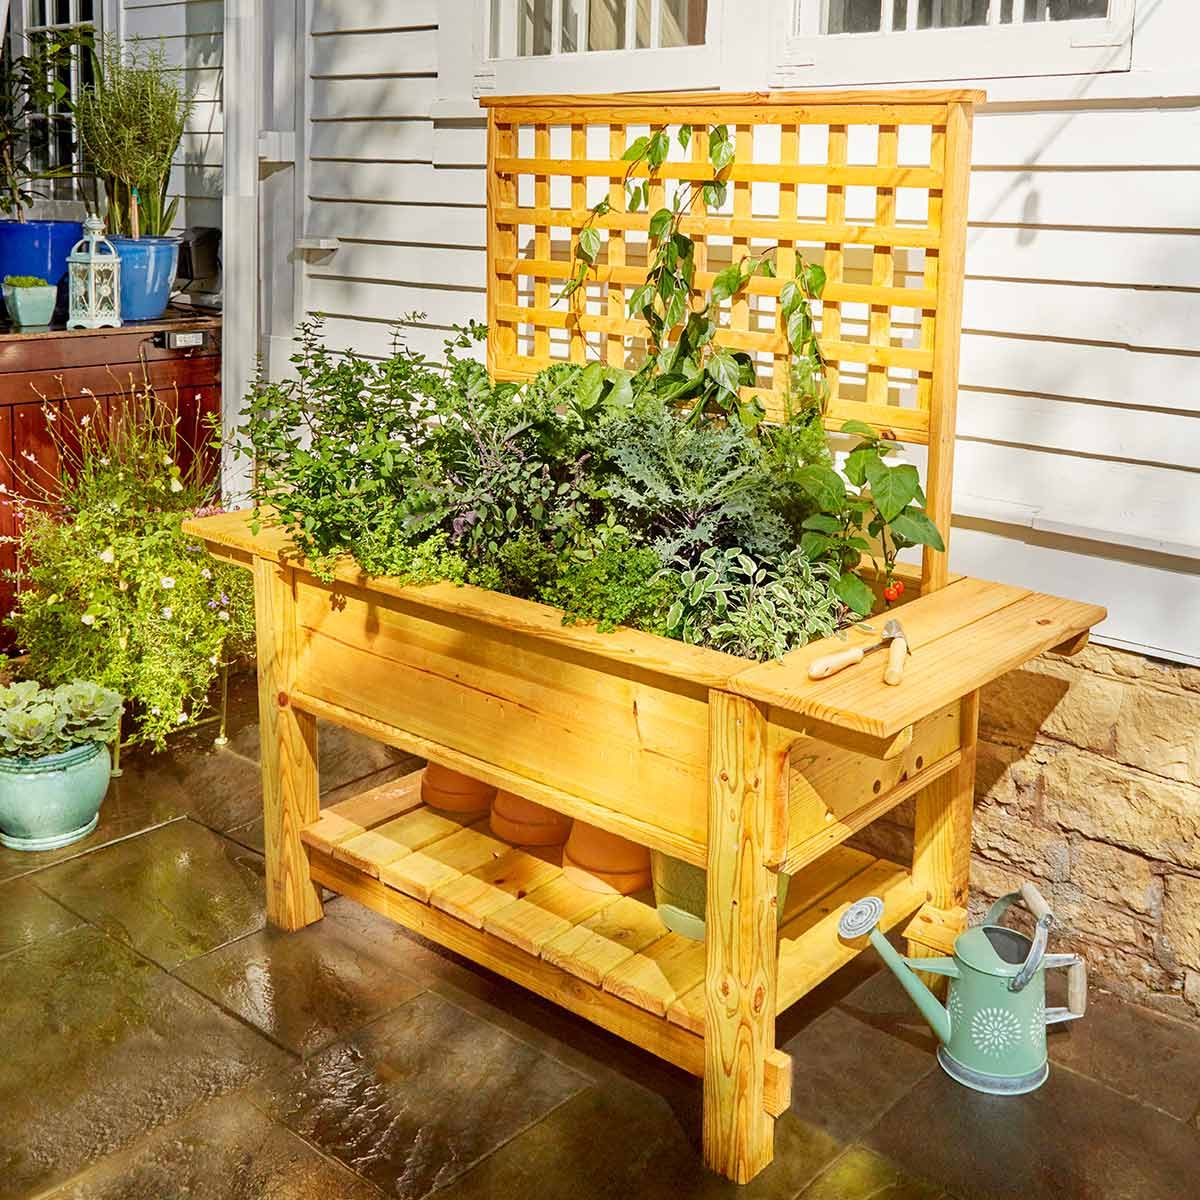 Woodwork projects for your garden and porch